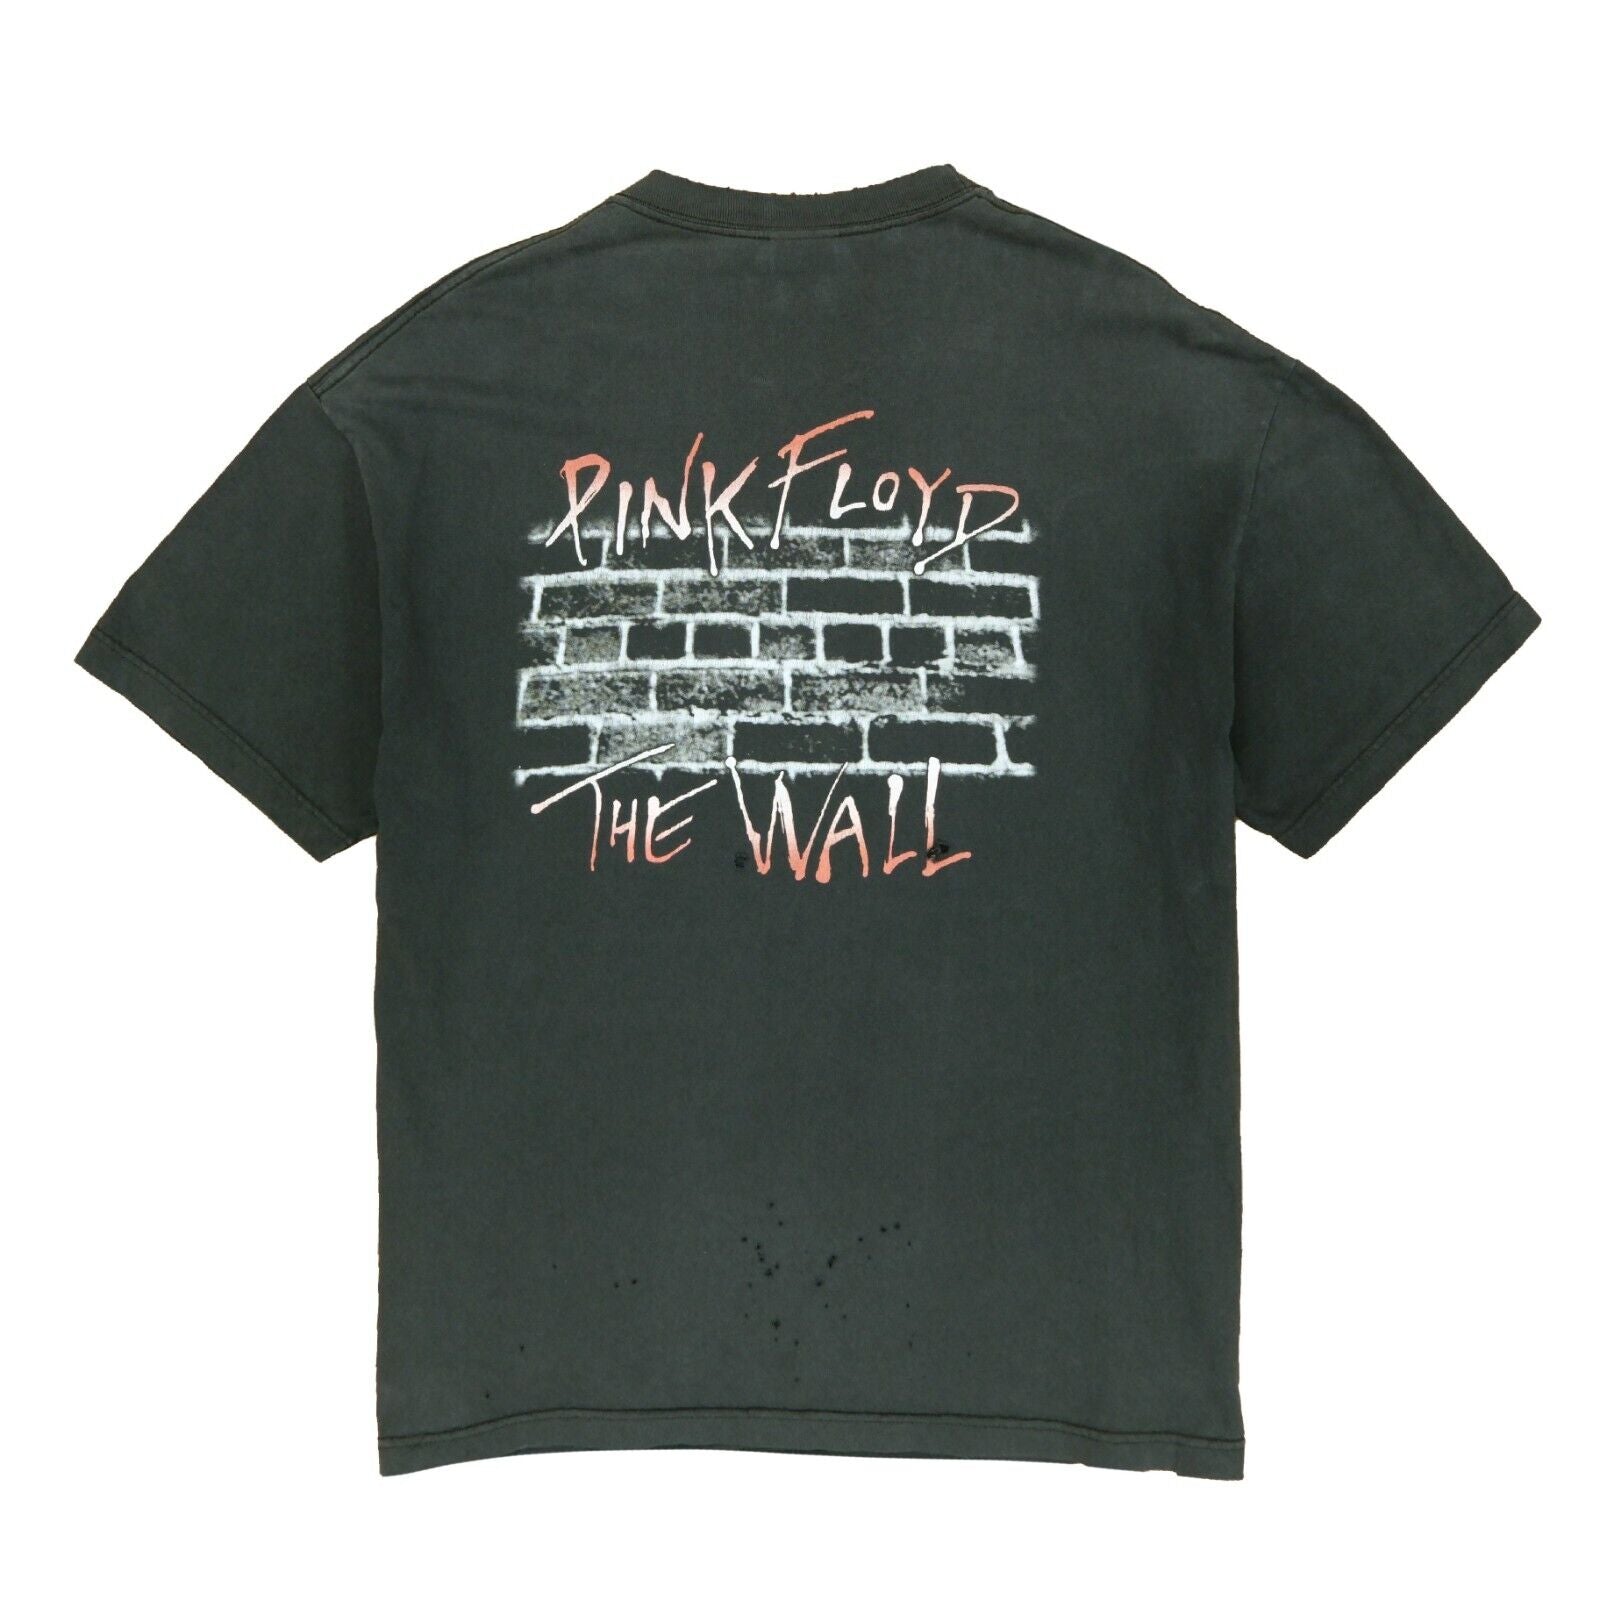 Vintage Pink Floyd The Wall T-Shirt Size XL Black Band Tee 2001 Y2K